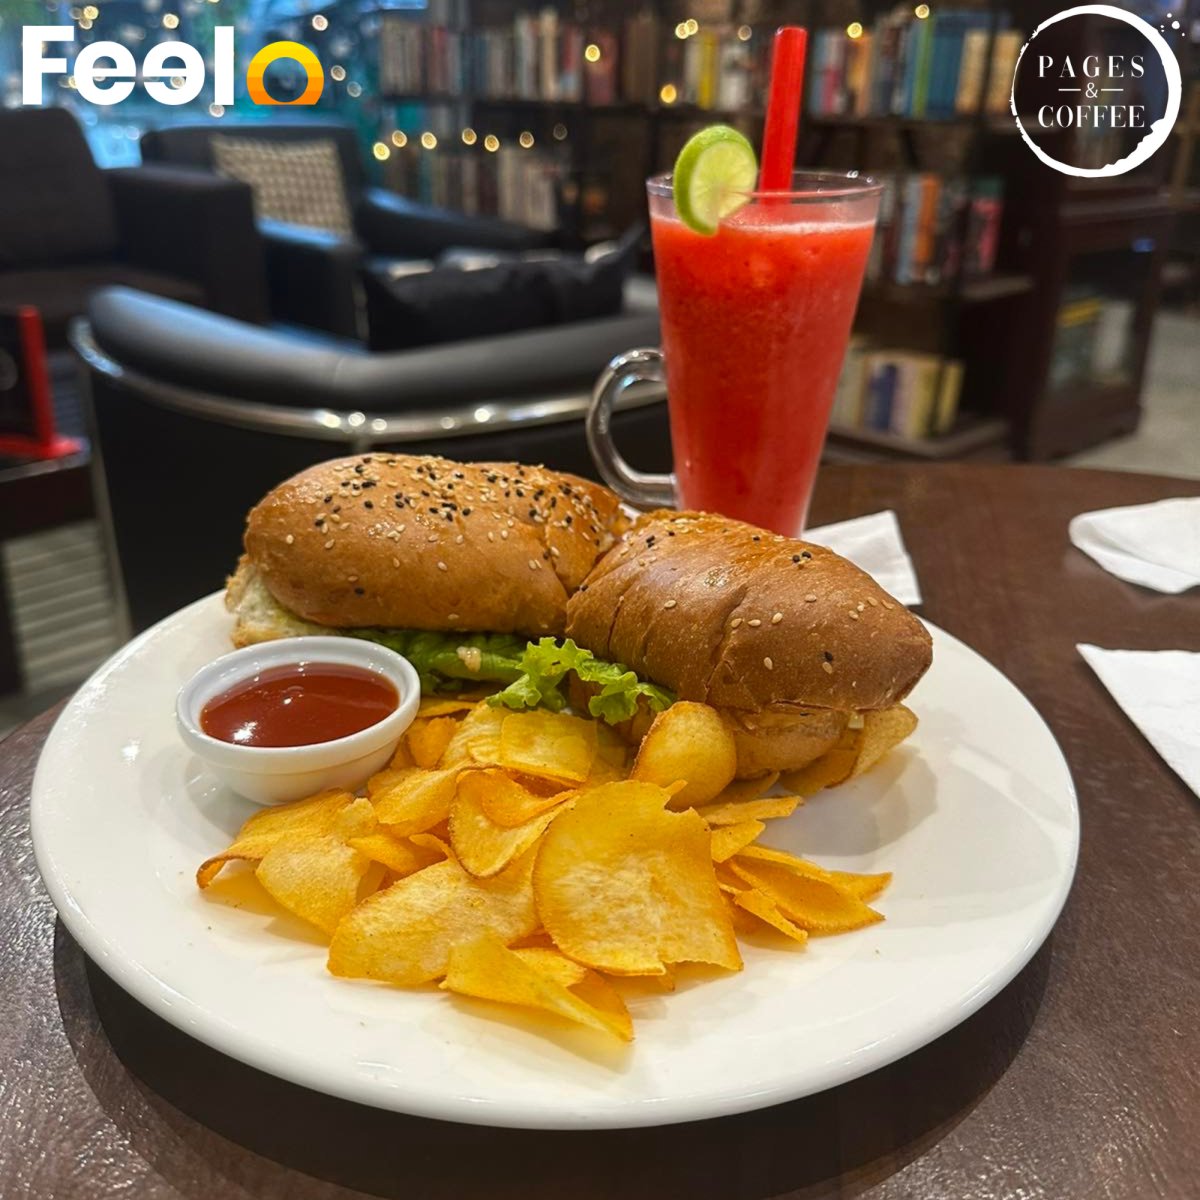 1x Delicious Submarine + Casava Chips + 1x Non-alcoholic Cocktail or Ice Tea - Pages & Coffee, Colombo - 06 | Feelo